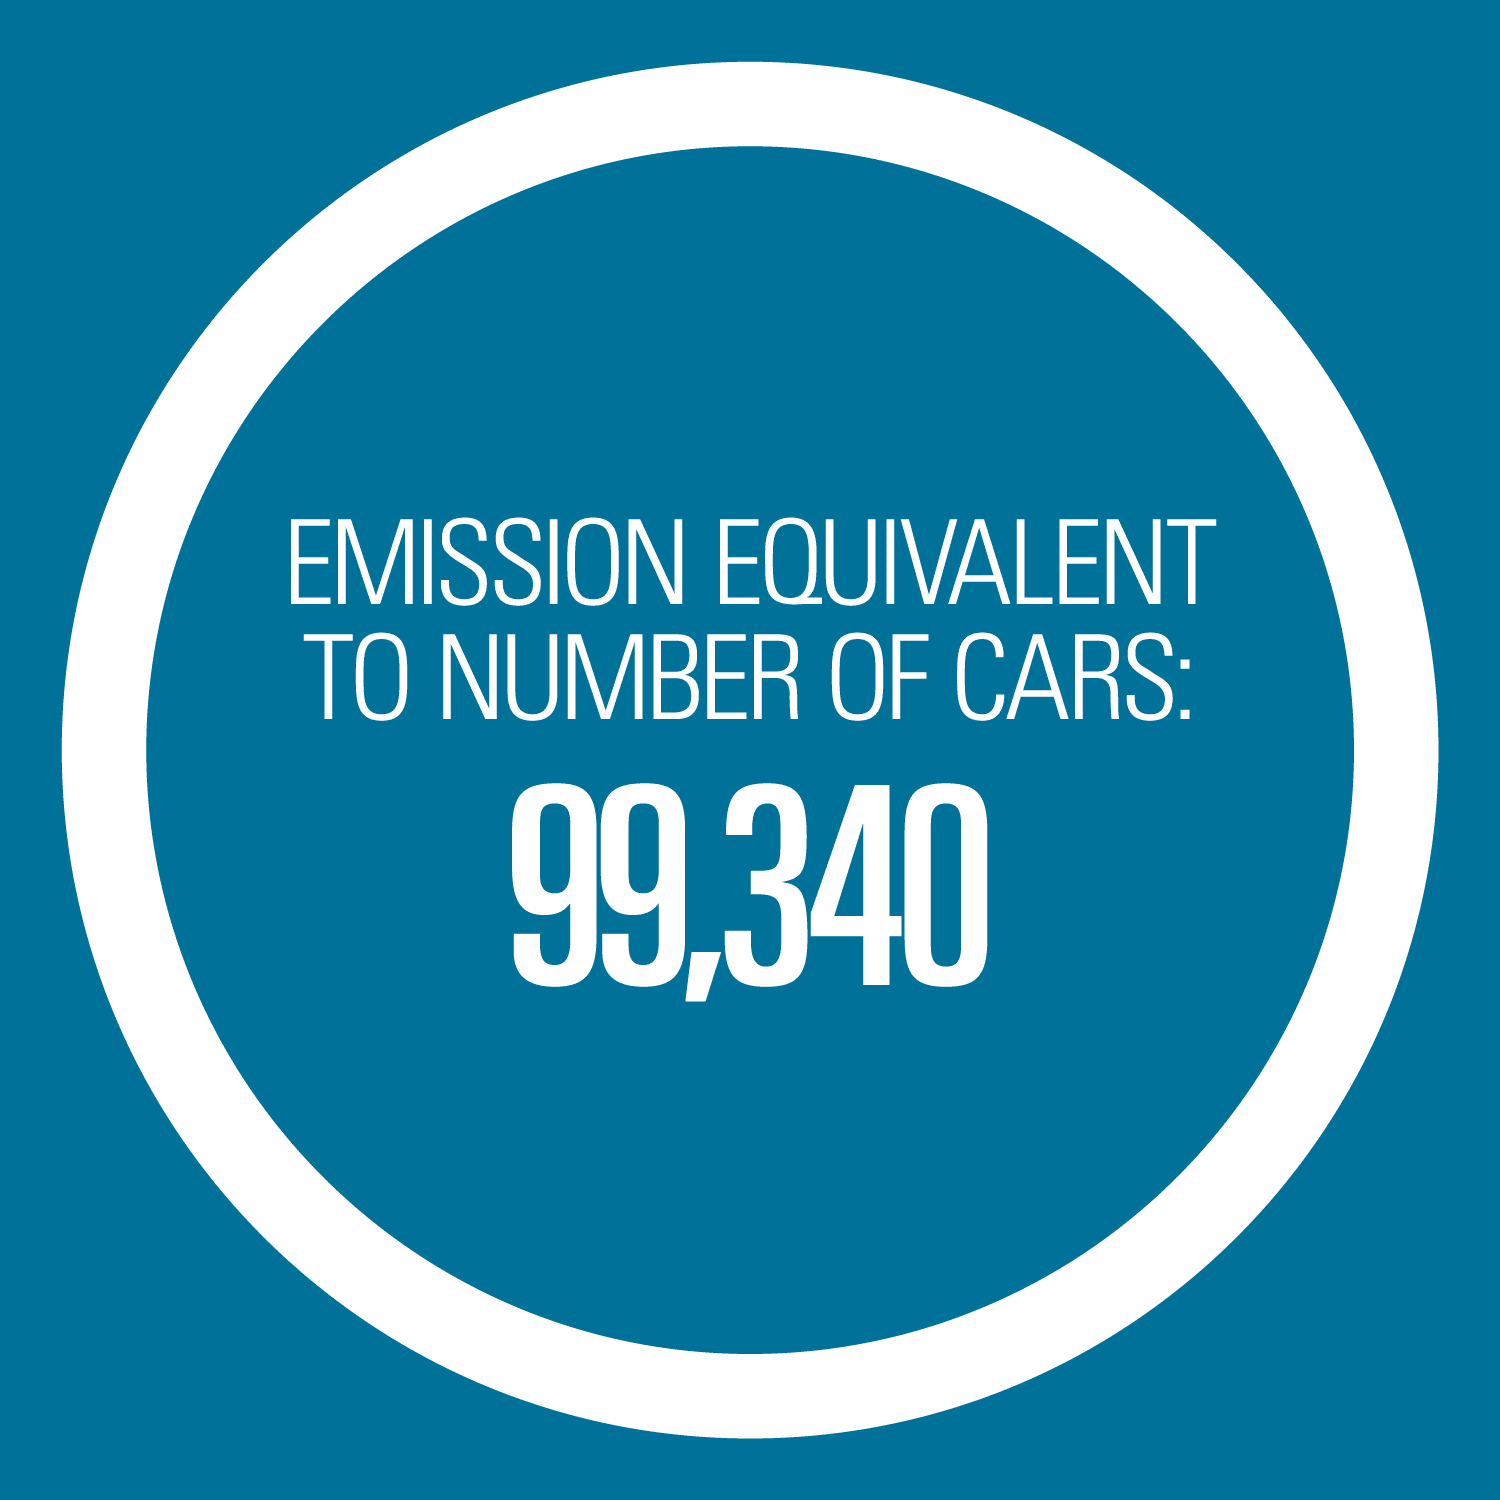 Emission Equivalent to number of cars: 99,340